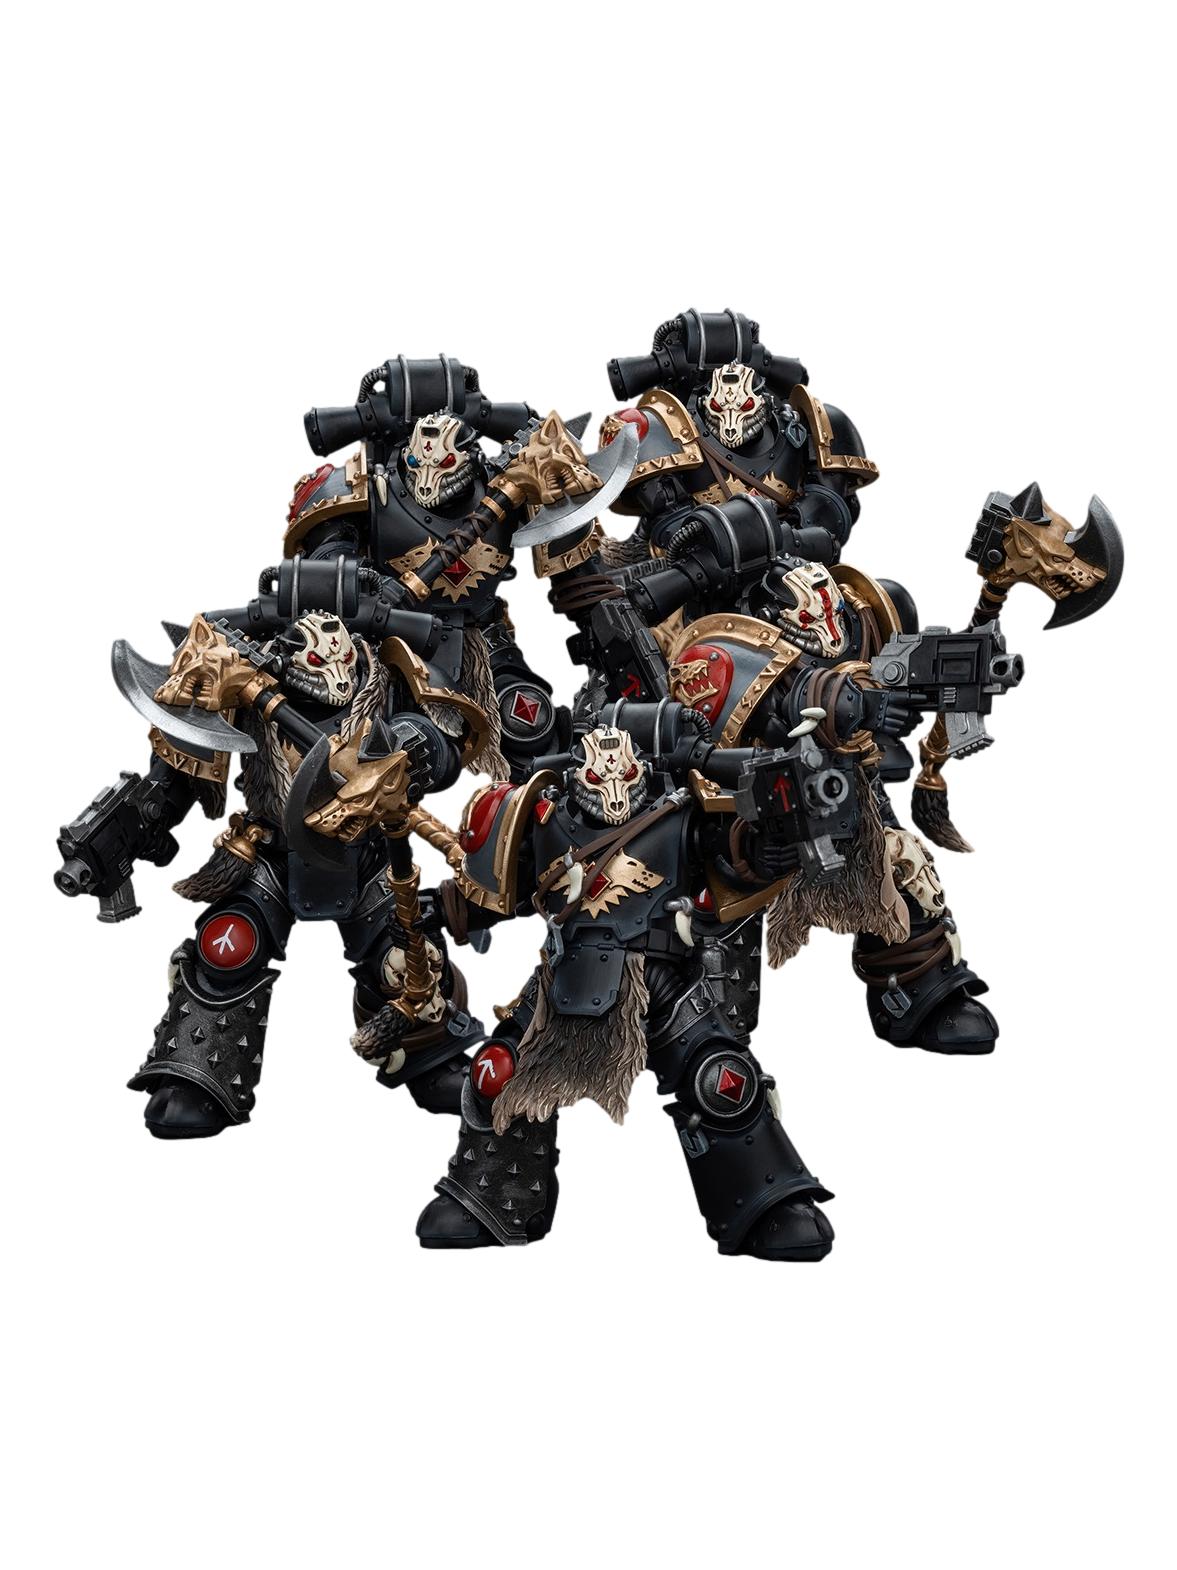 Warhammer The Horus Heresy: Space Wolves Deathsworn Squad: All 5 Figure Bundle Joy Toy